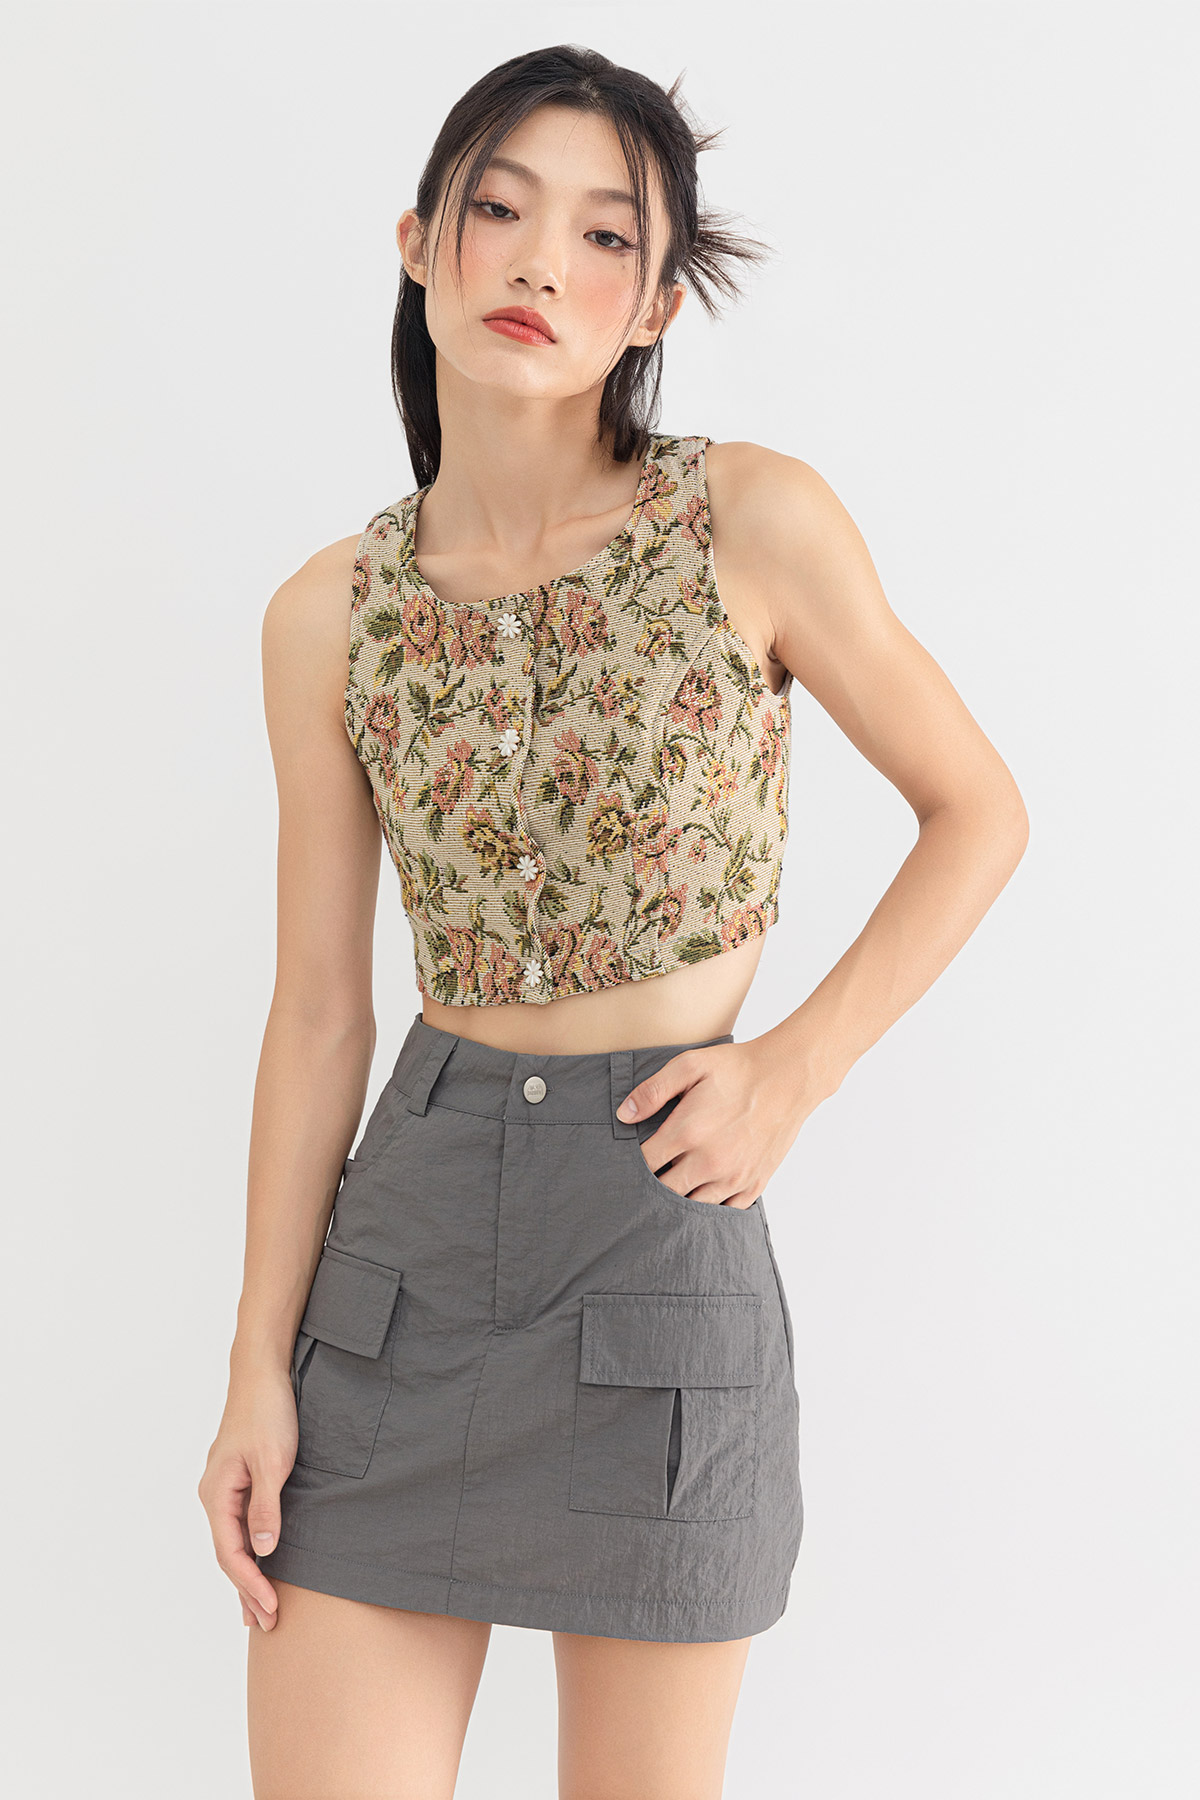 JACQUETTE TOP - KEEPSAKE ROSE [BY MODPARADE]